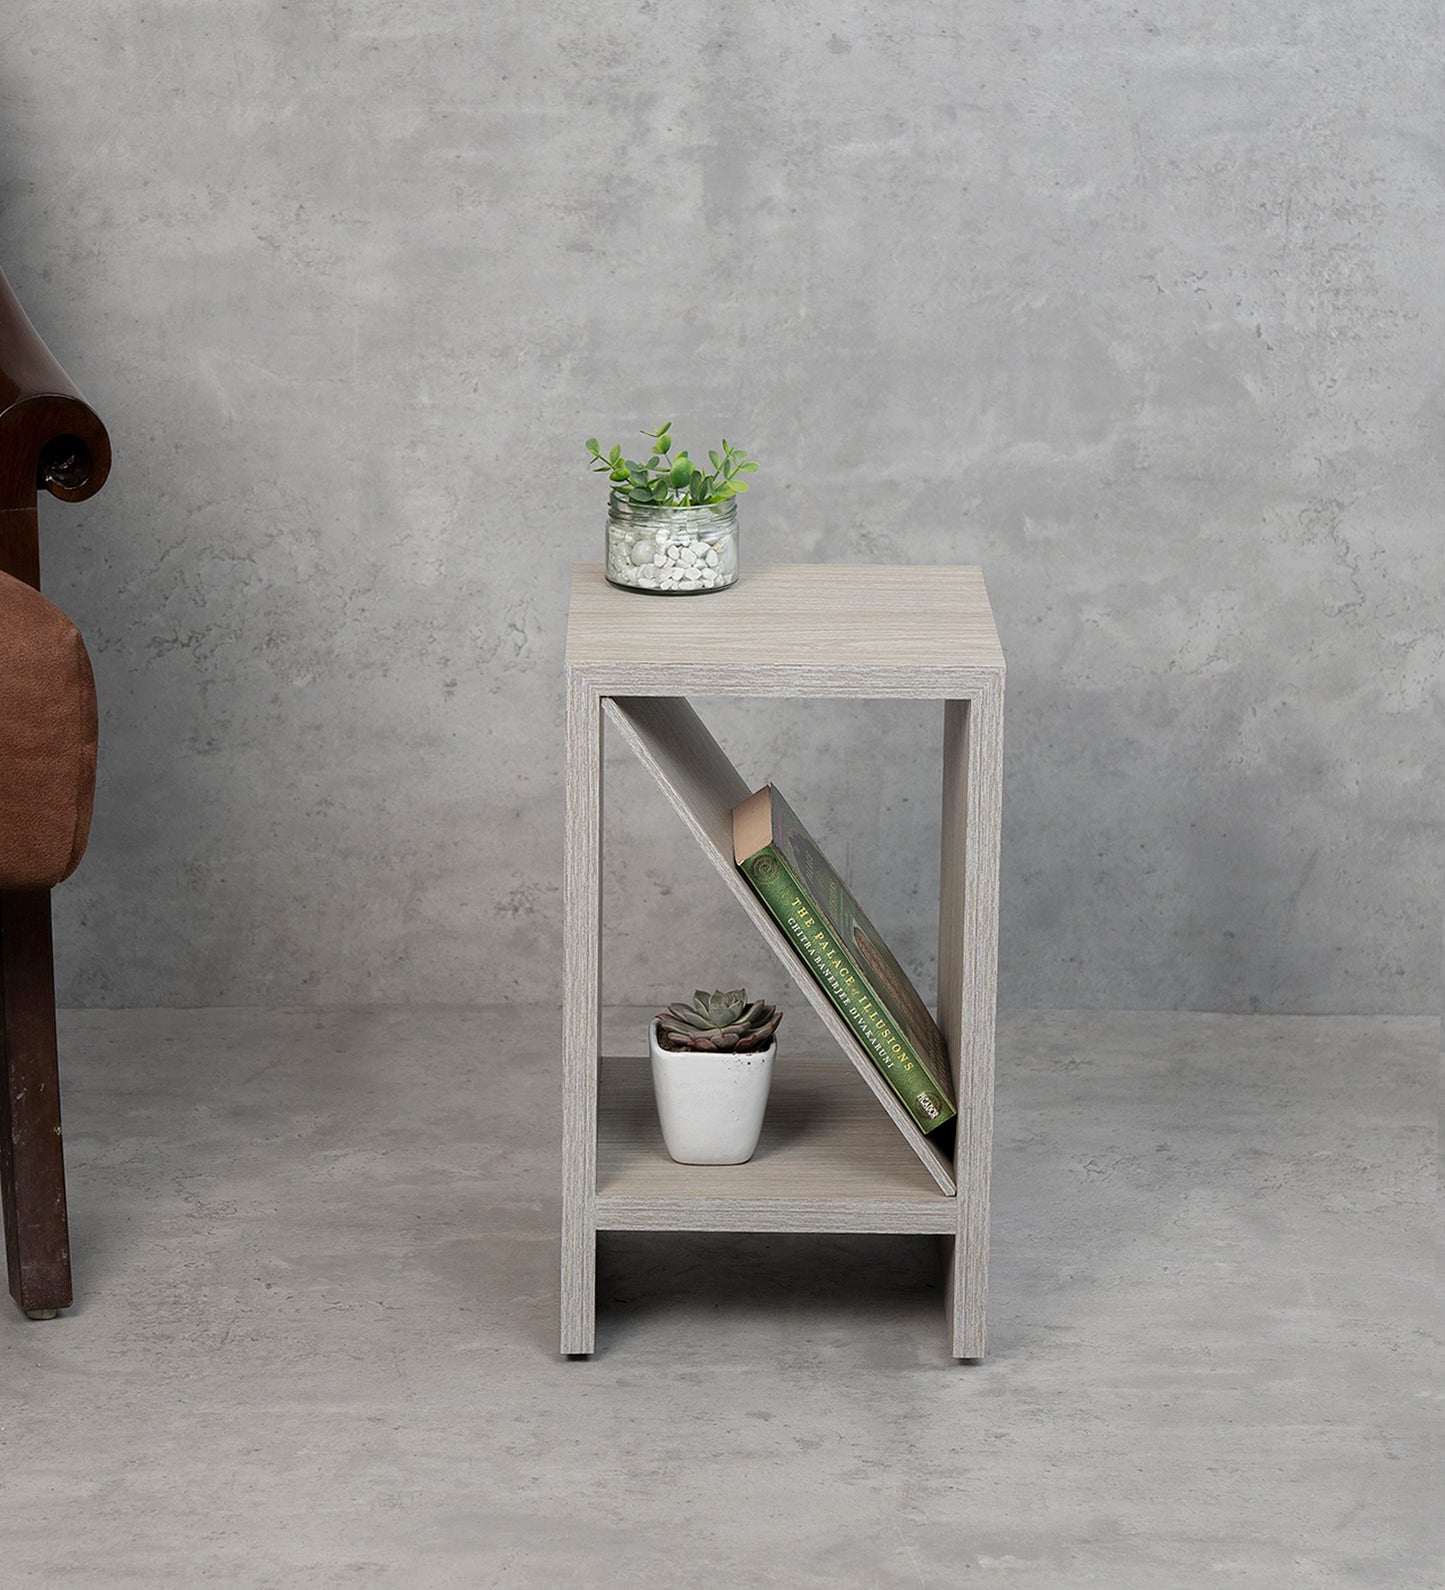 Bevel - Side Table, Small Storage and Decor, End Table, Living and Bedroom Decor, Wooden Table